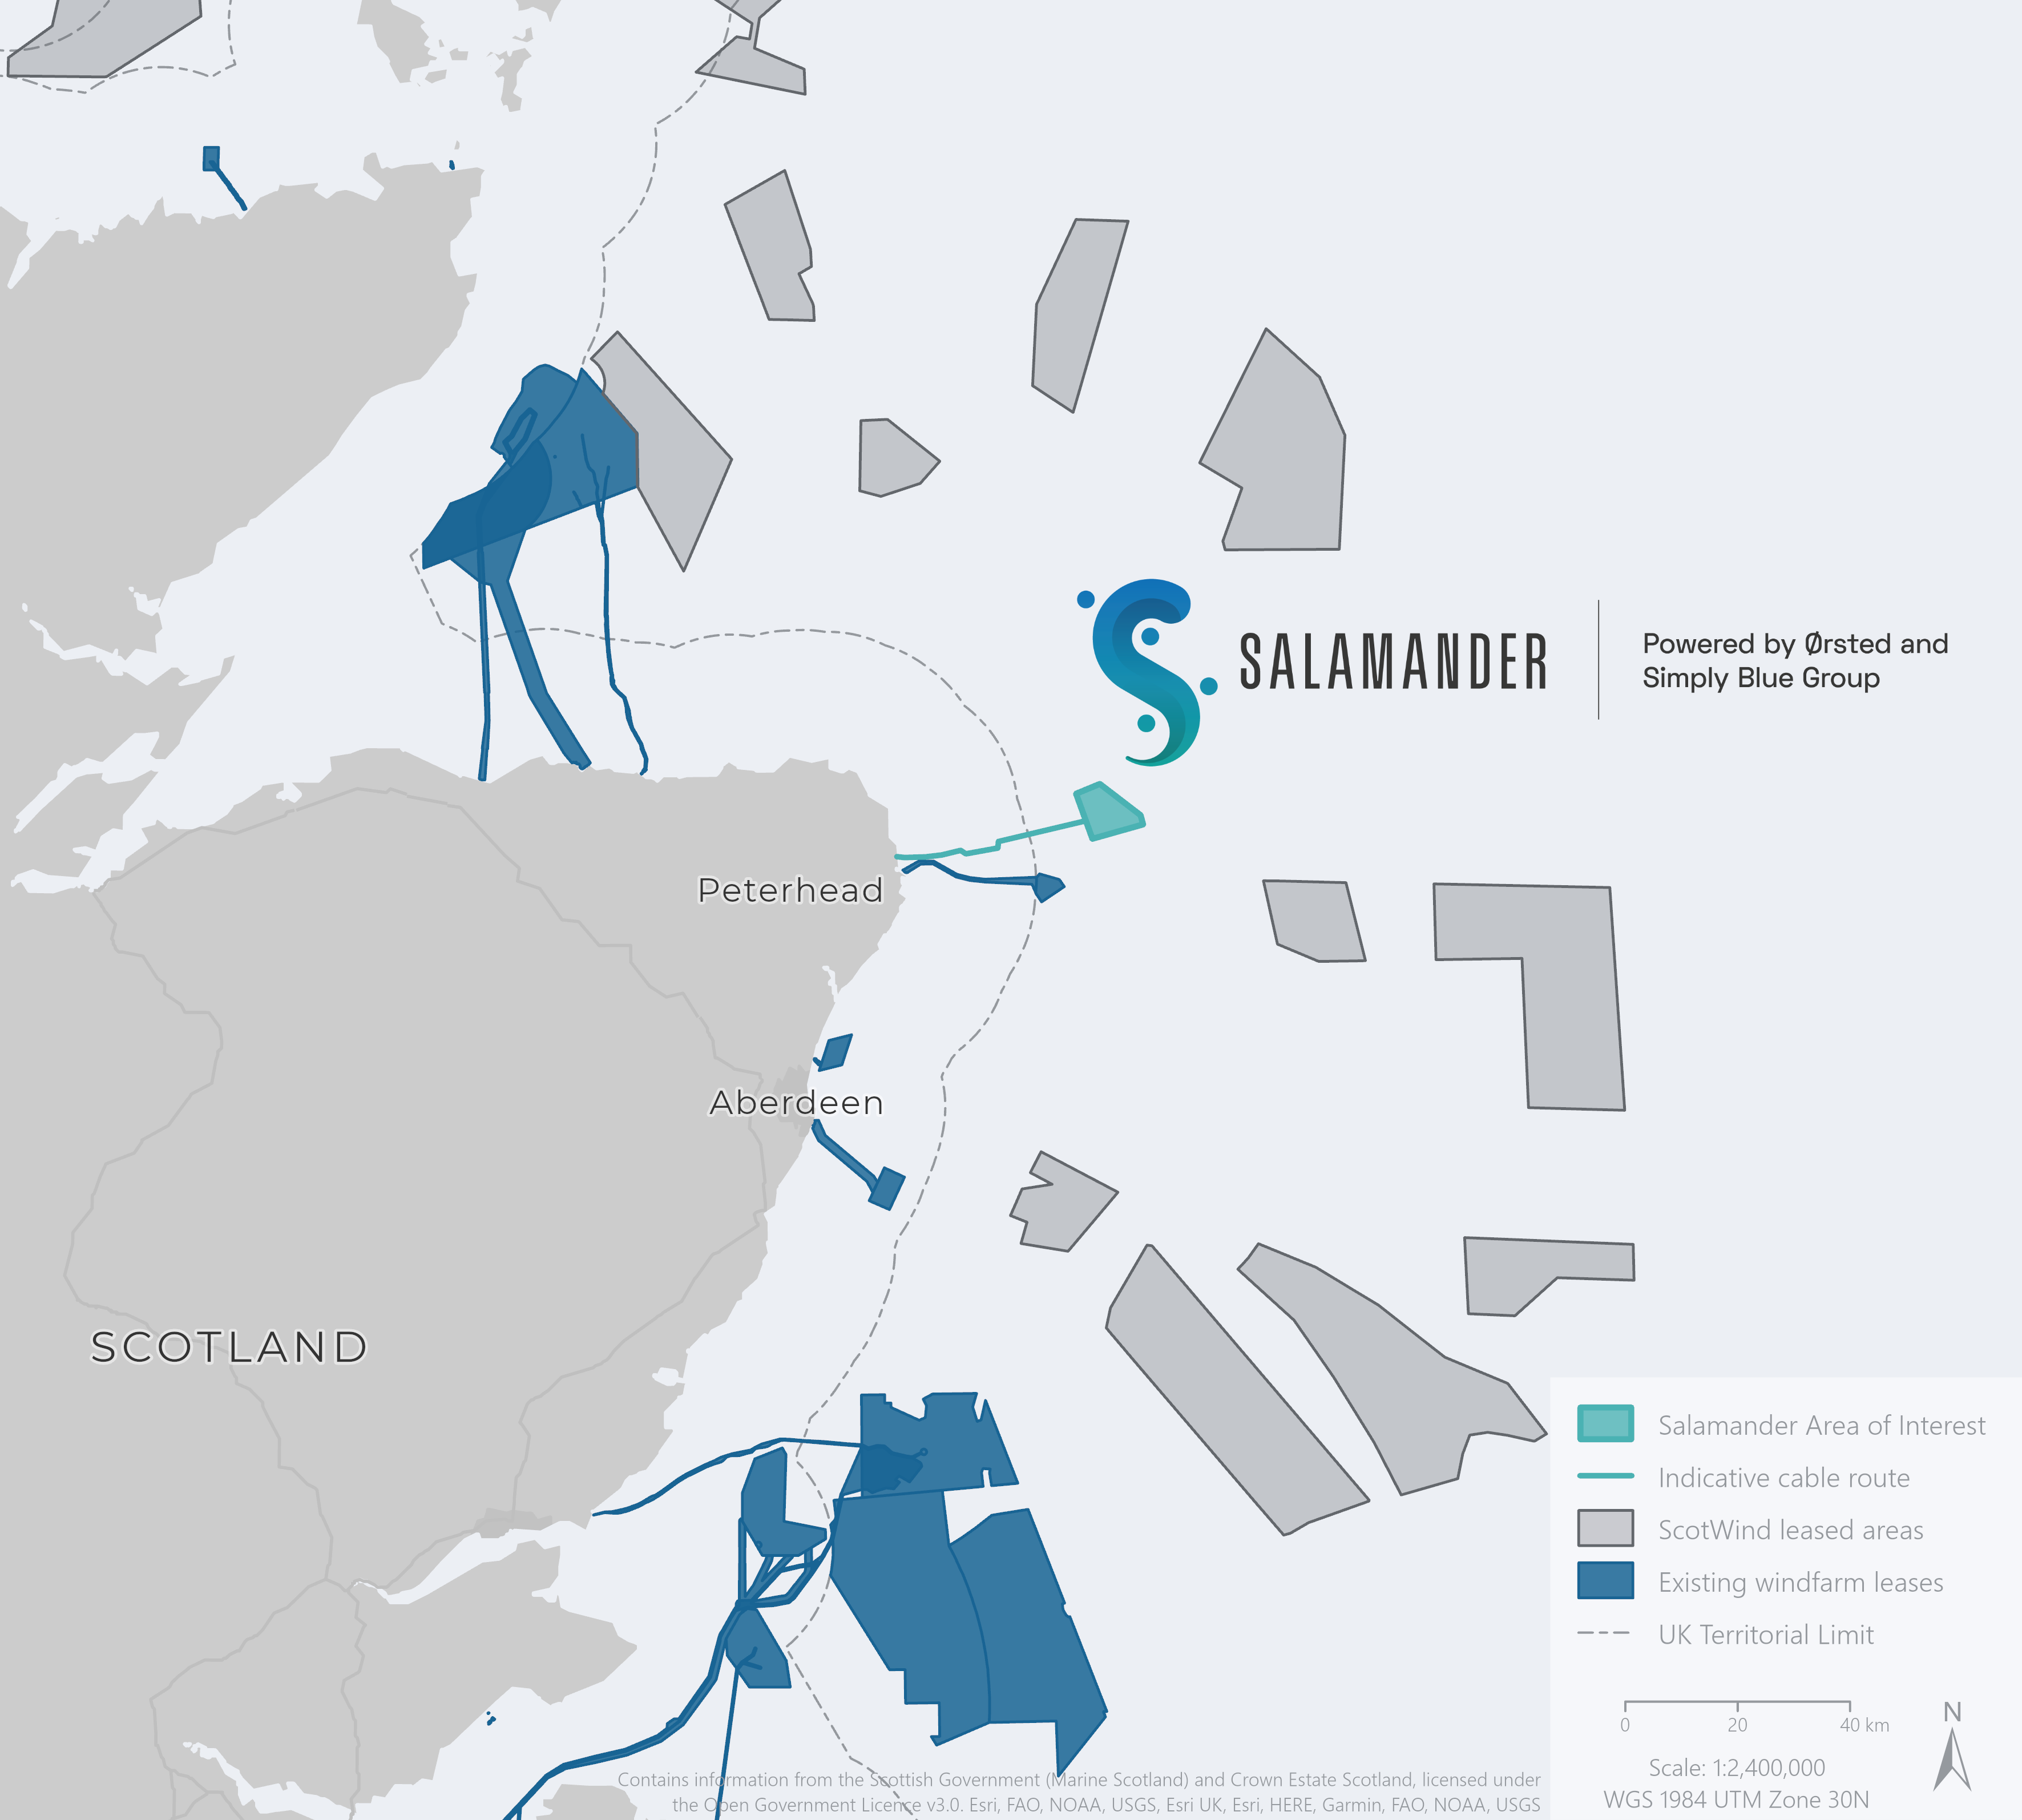 MEMBER NEWS: Salamander signs exclusivity agreement for Scottish floating wind lease